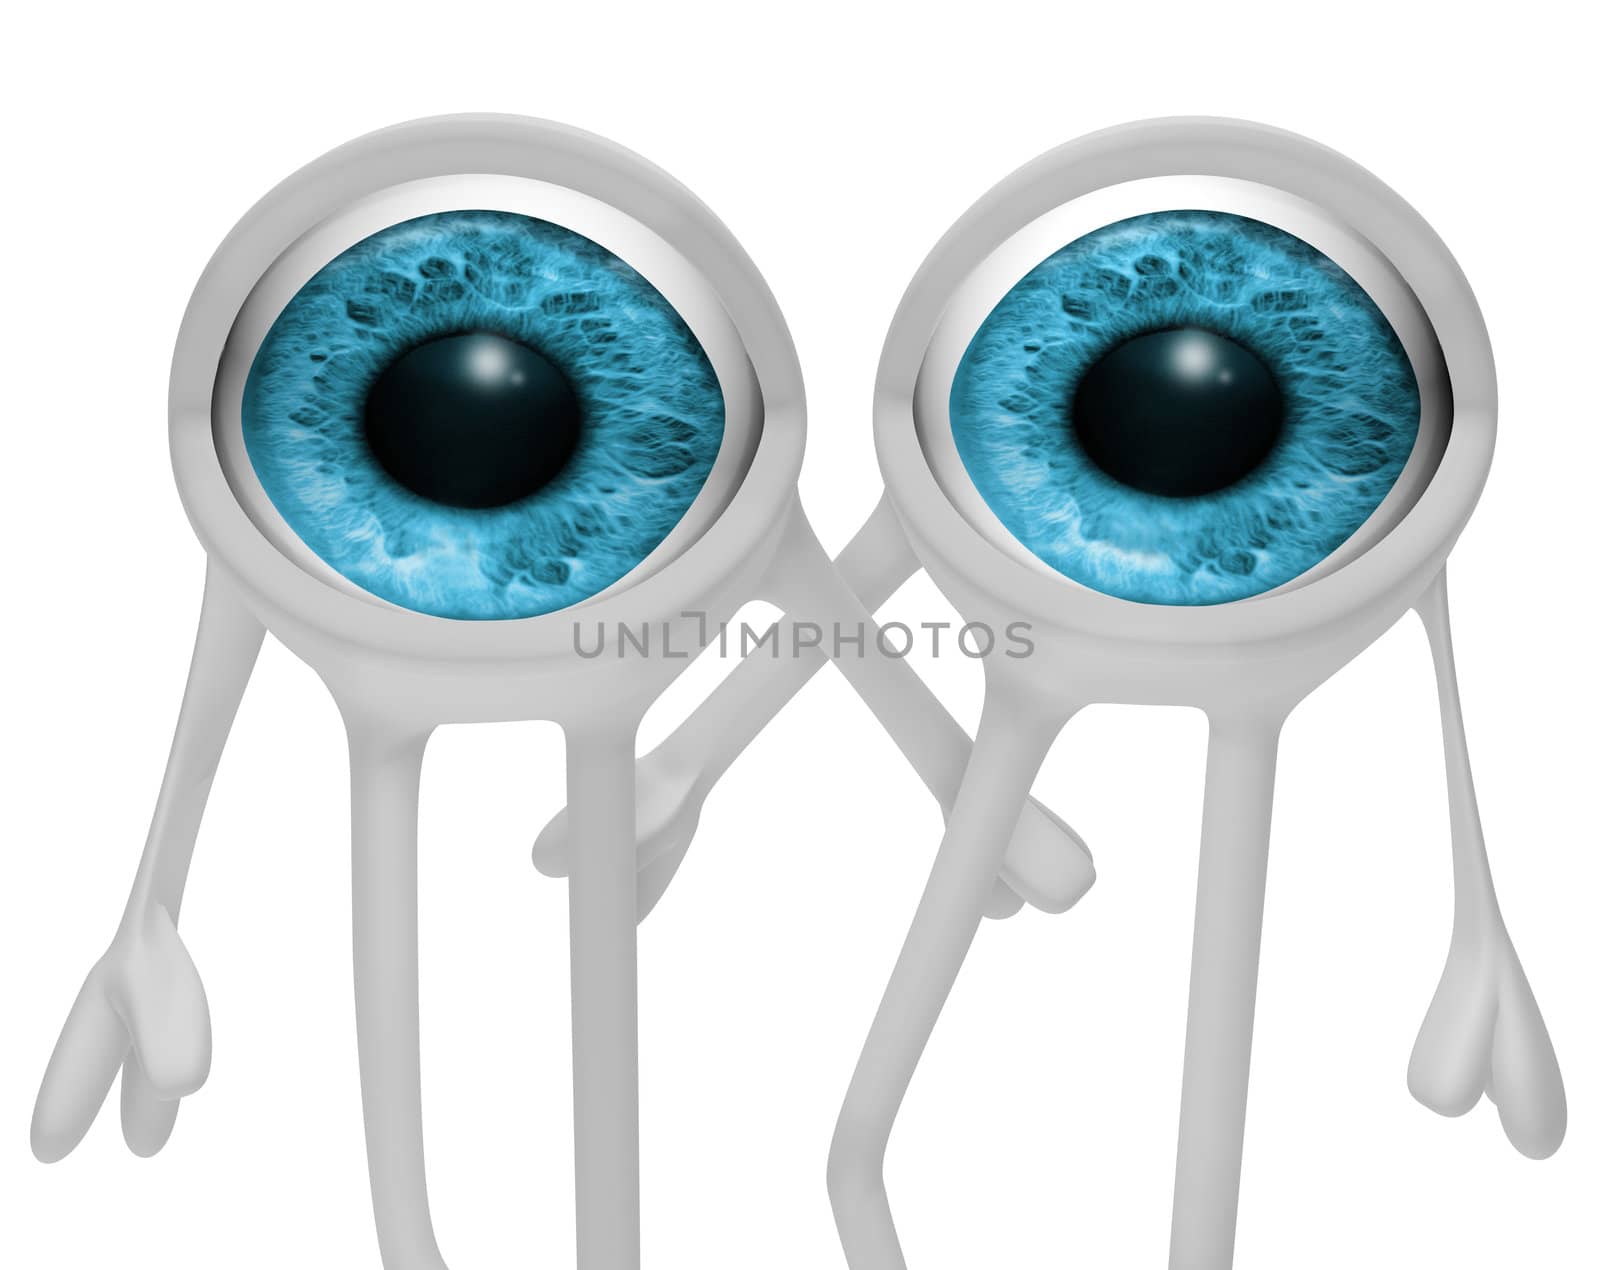 3d image of two eyes